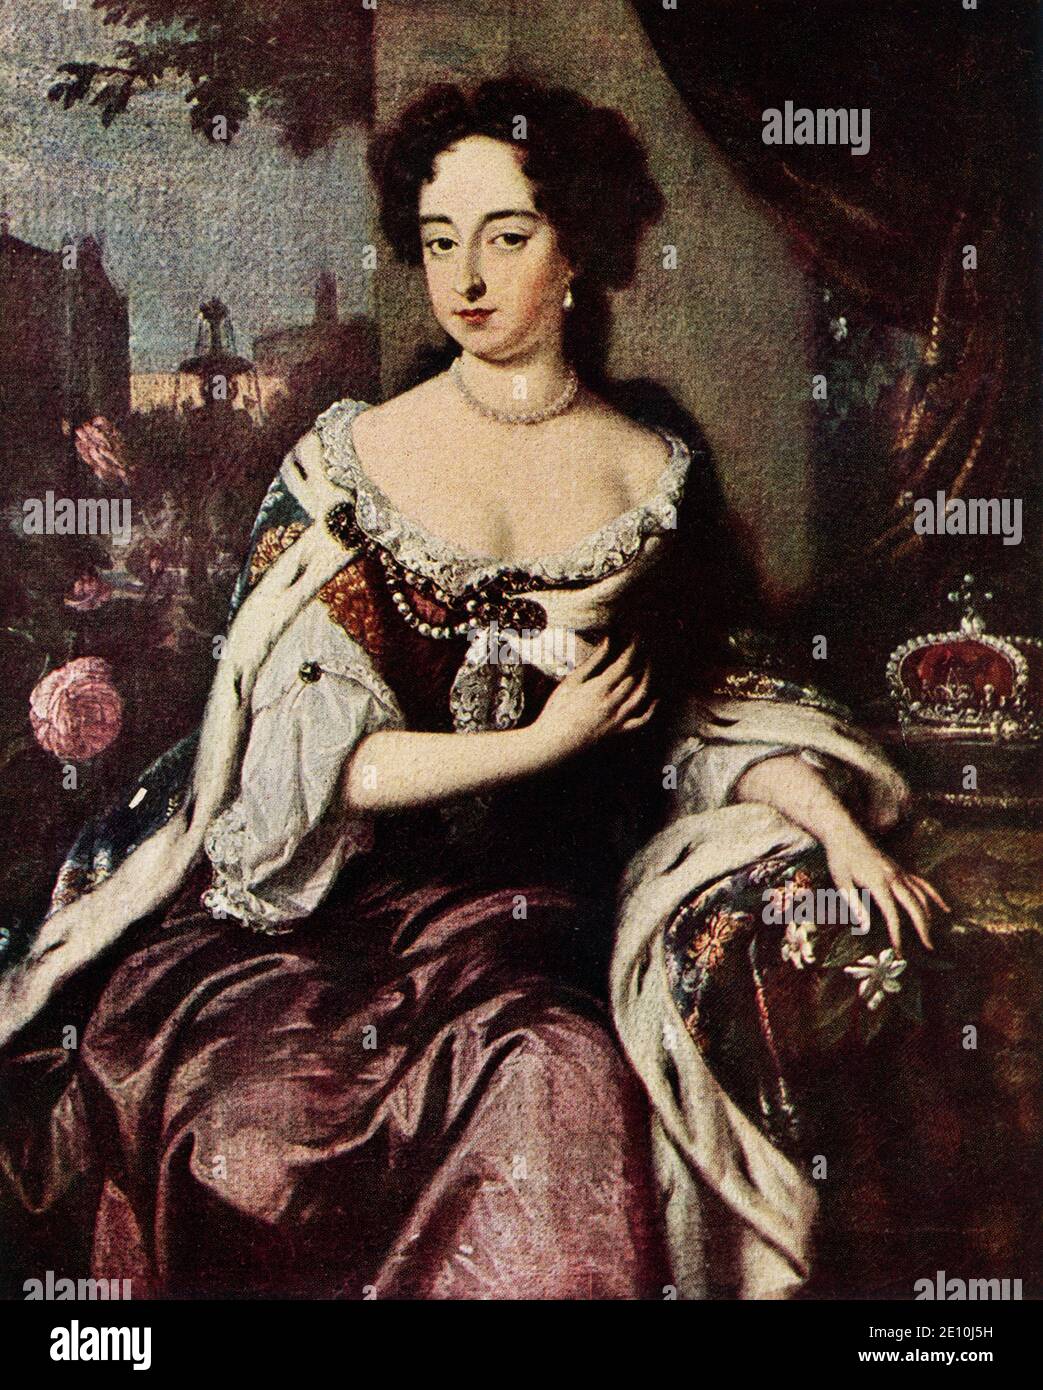 Mary Princess of Orange, from a oainting by J Closterman in the National Portrait Gallery. Mary, Princess Royal, was an English princess, member of the House of Stuart, and by marriage Princess of Orange and Countess of Nassau; she also acted as regent for her minor son from 1651 to 1660. She also was the first holder of the title Princess Royal. John Closterman (also spelled Cloosterman, Klosterman) was a Westphalian portrait painter of the late 17th and early 18th centuries. His subjects were mostly European noblemen and their families. Stock Photo